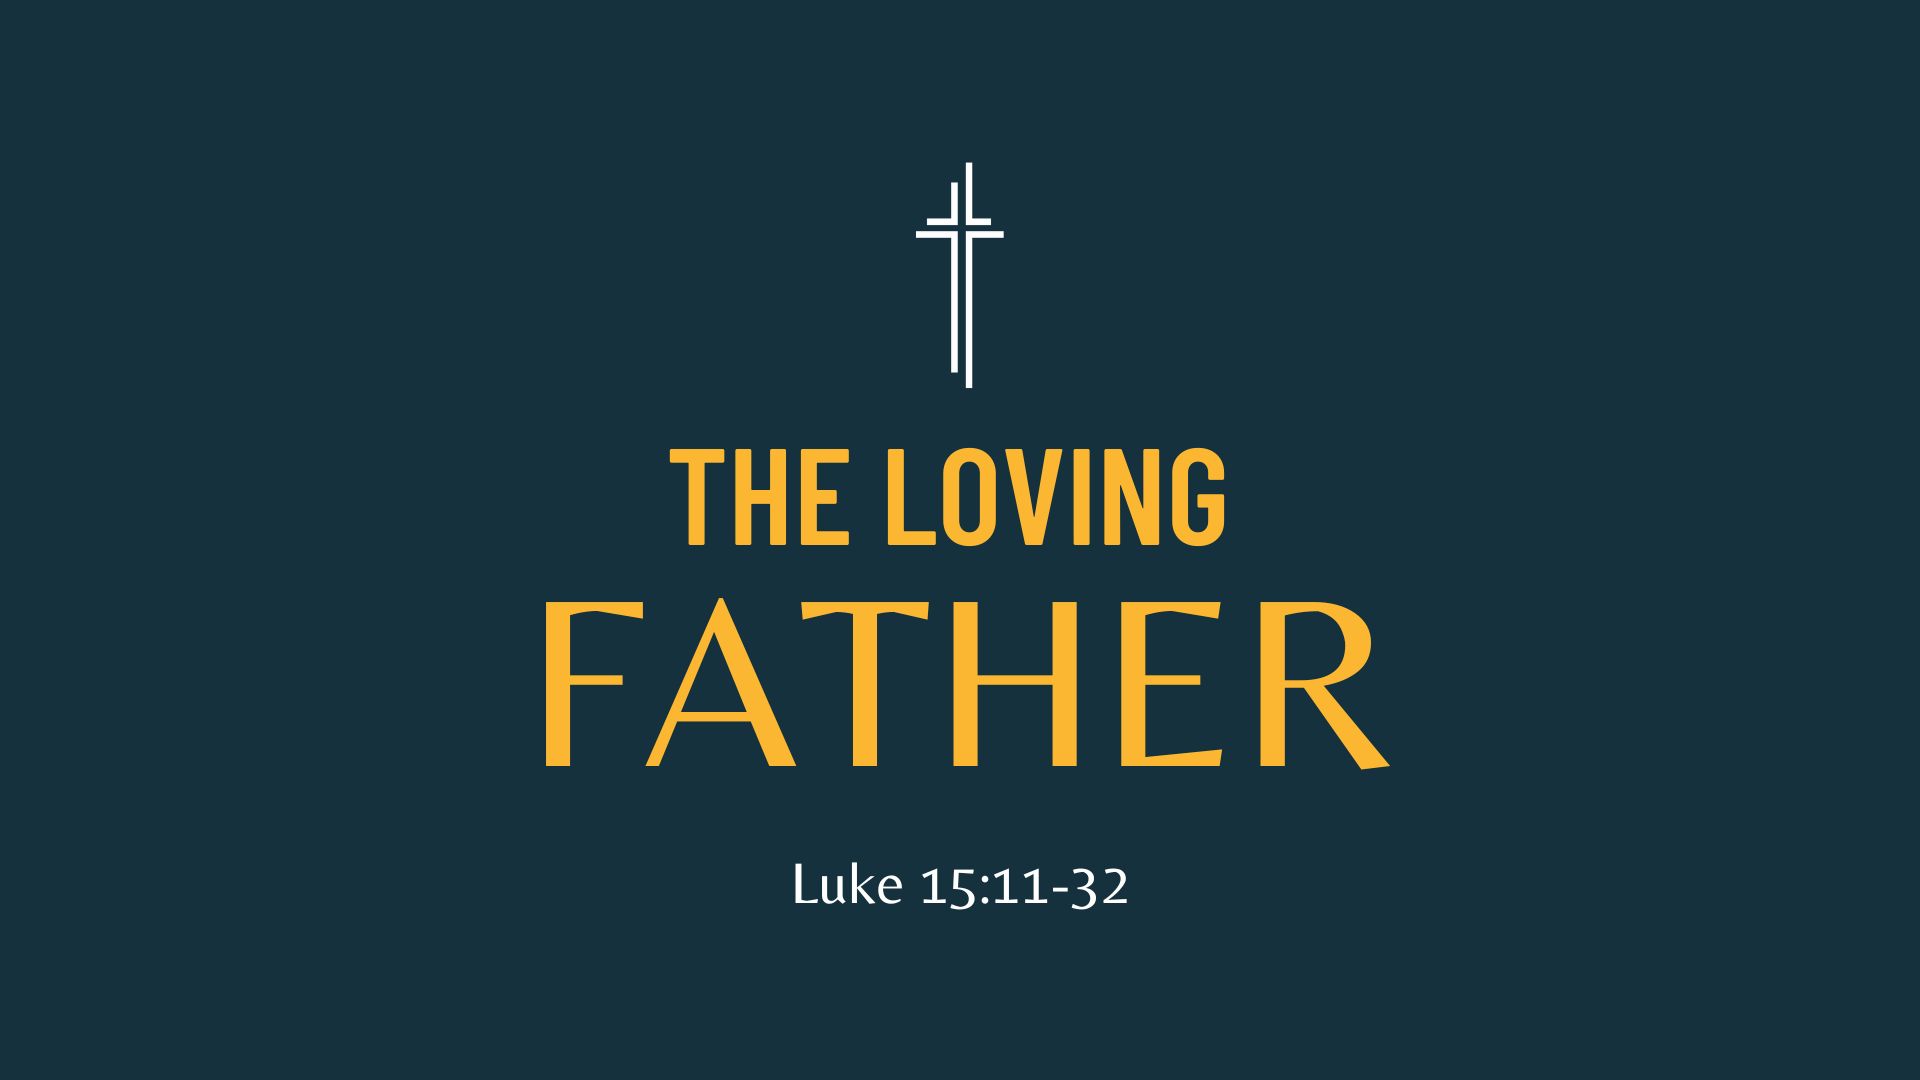 The Loving Father